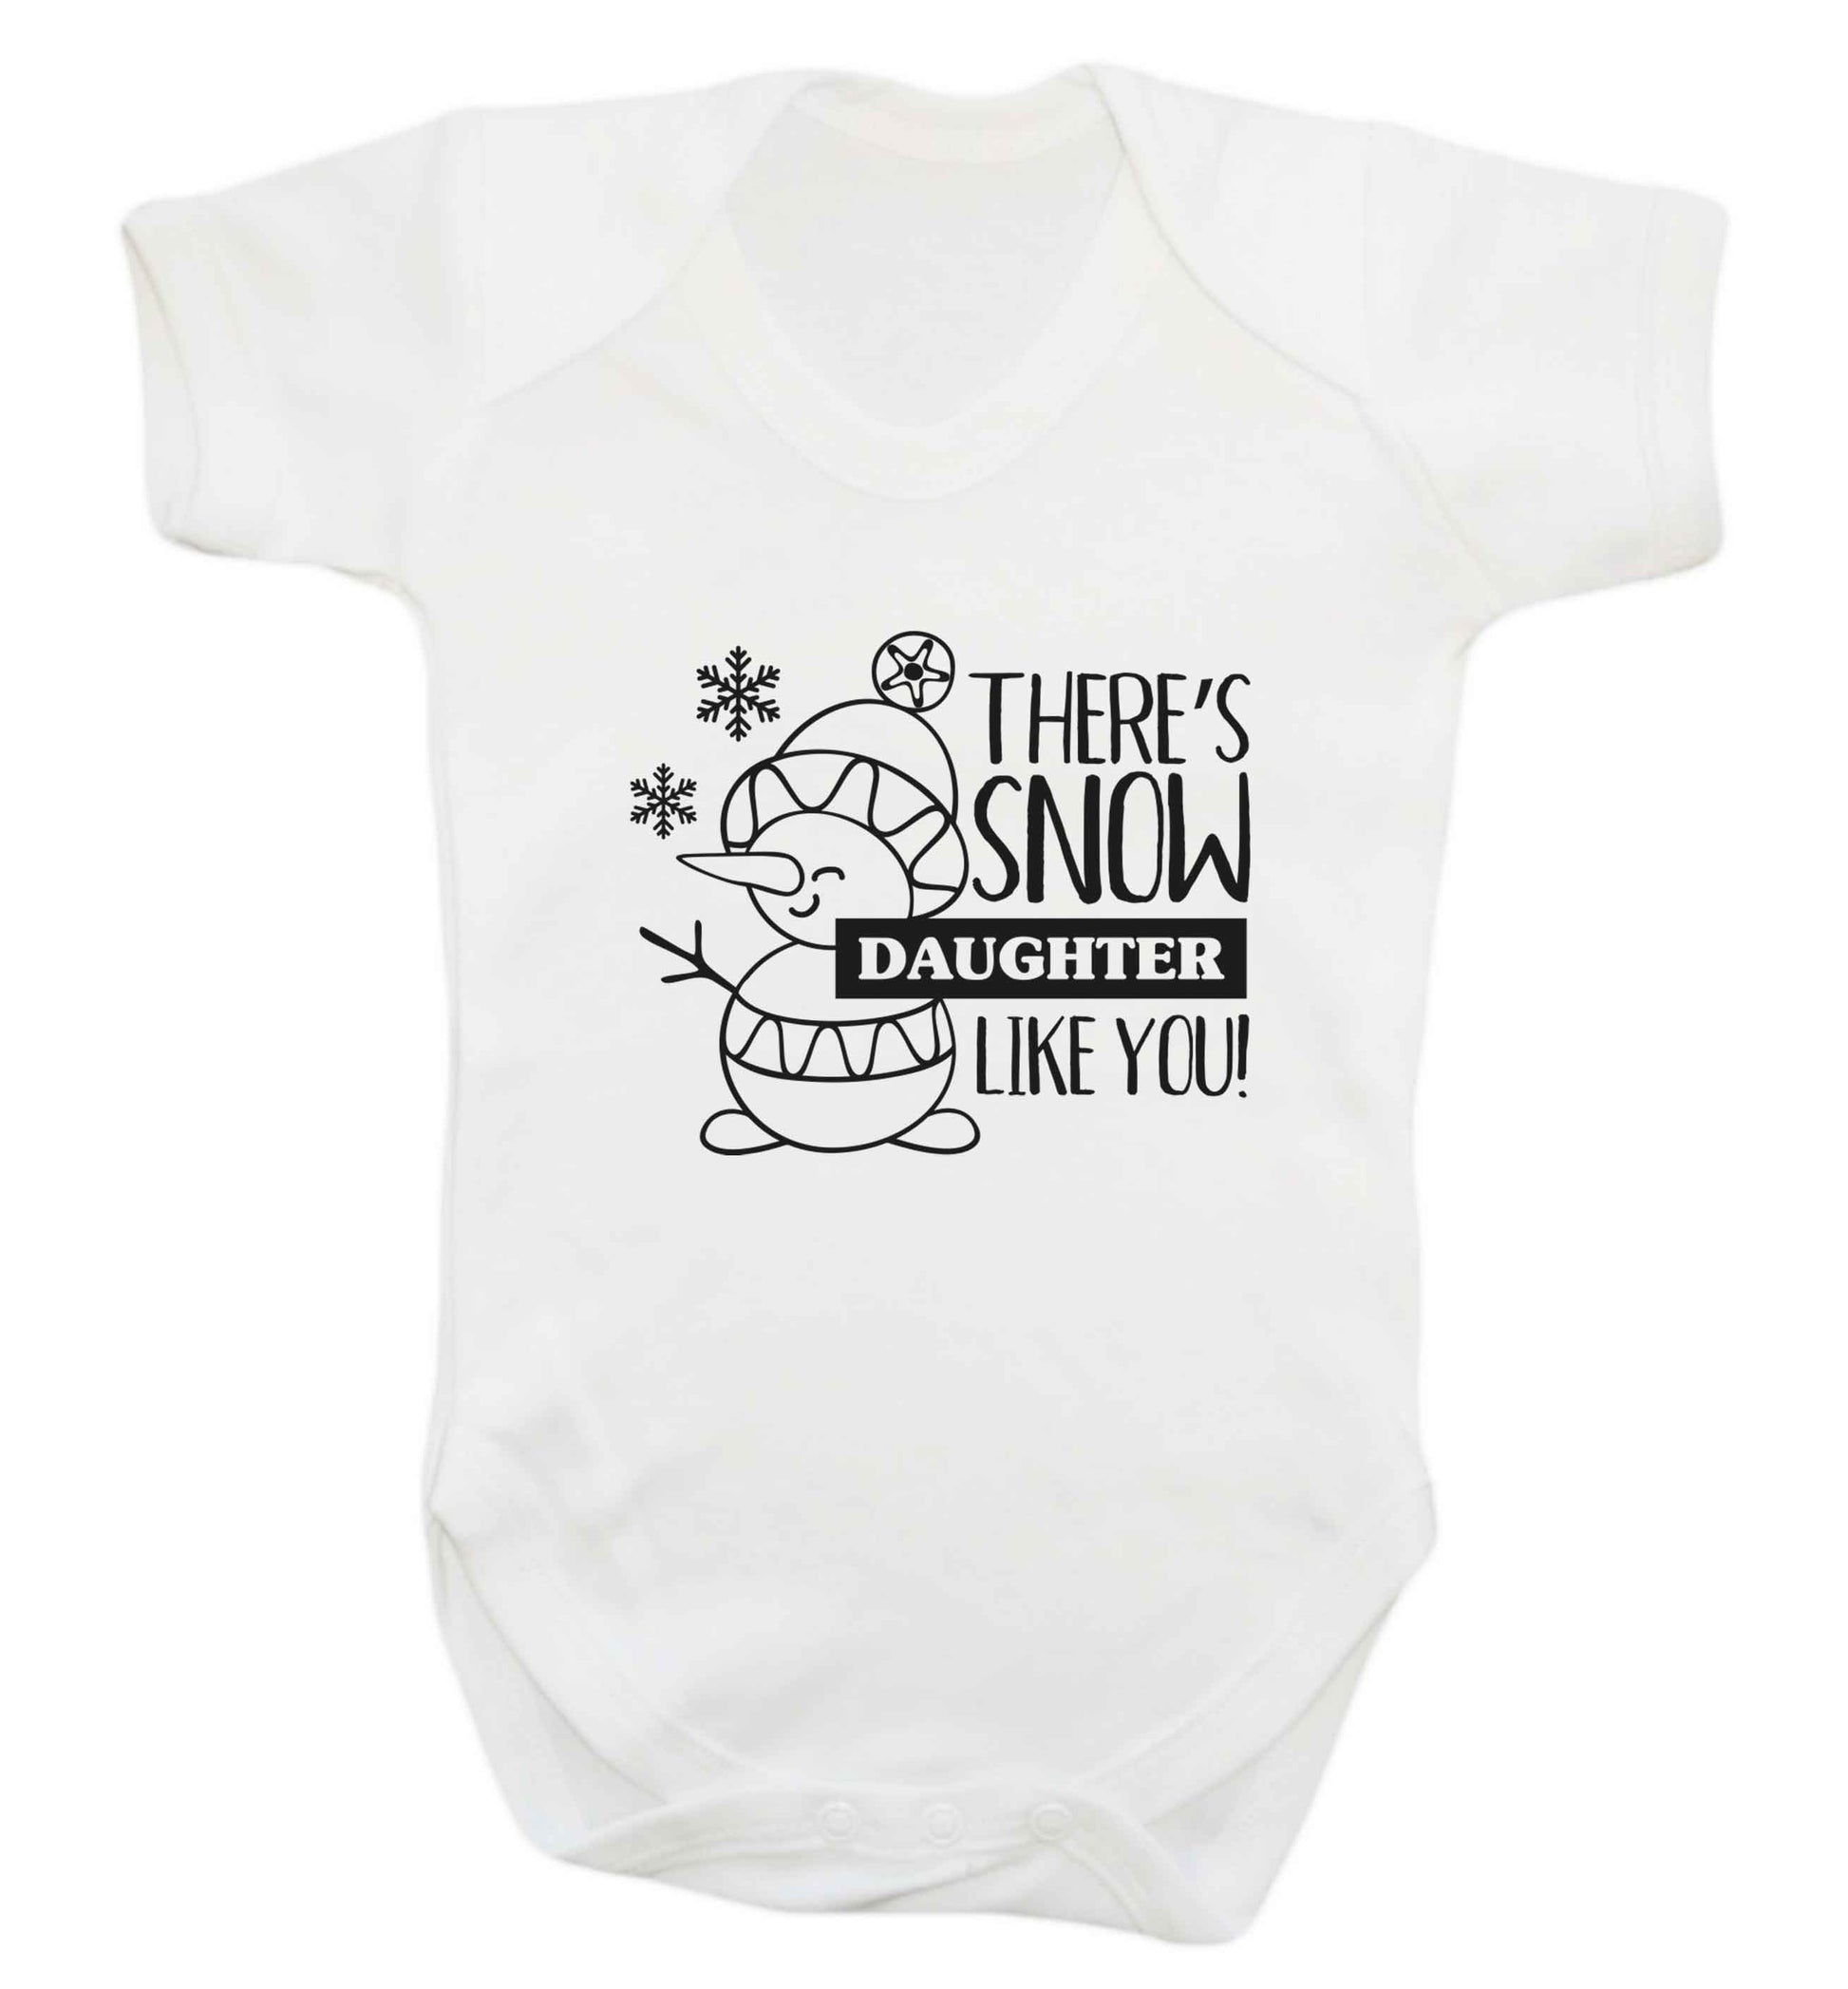 There's snow daughter like you baby vest white 18-24 months